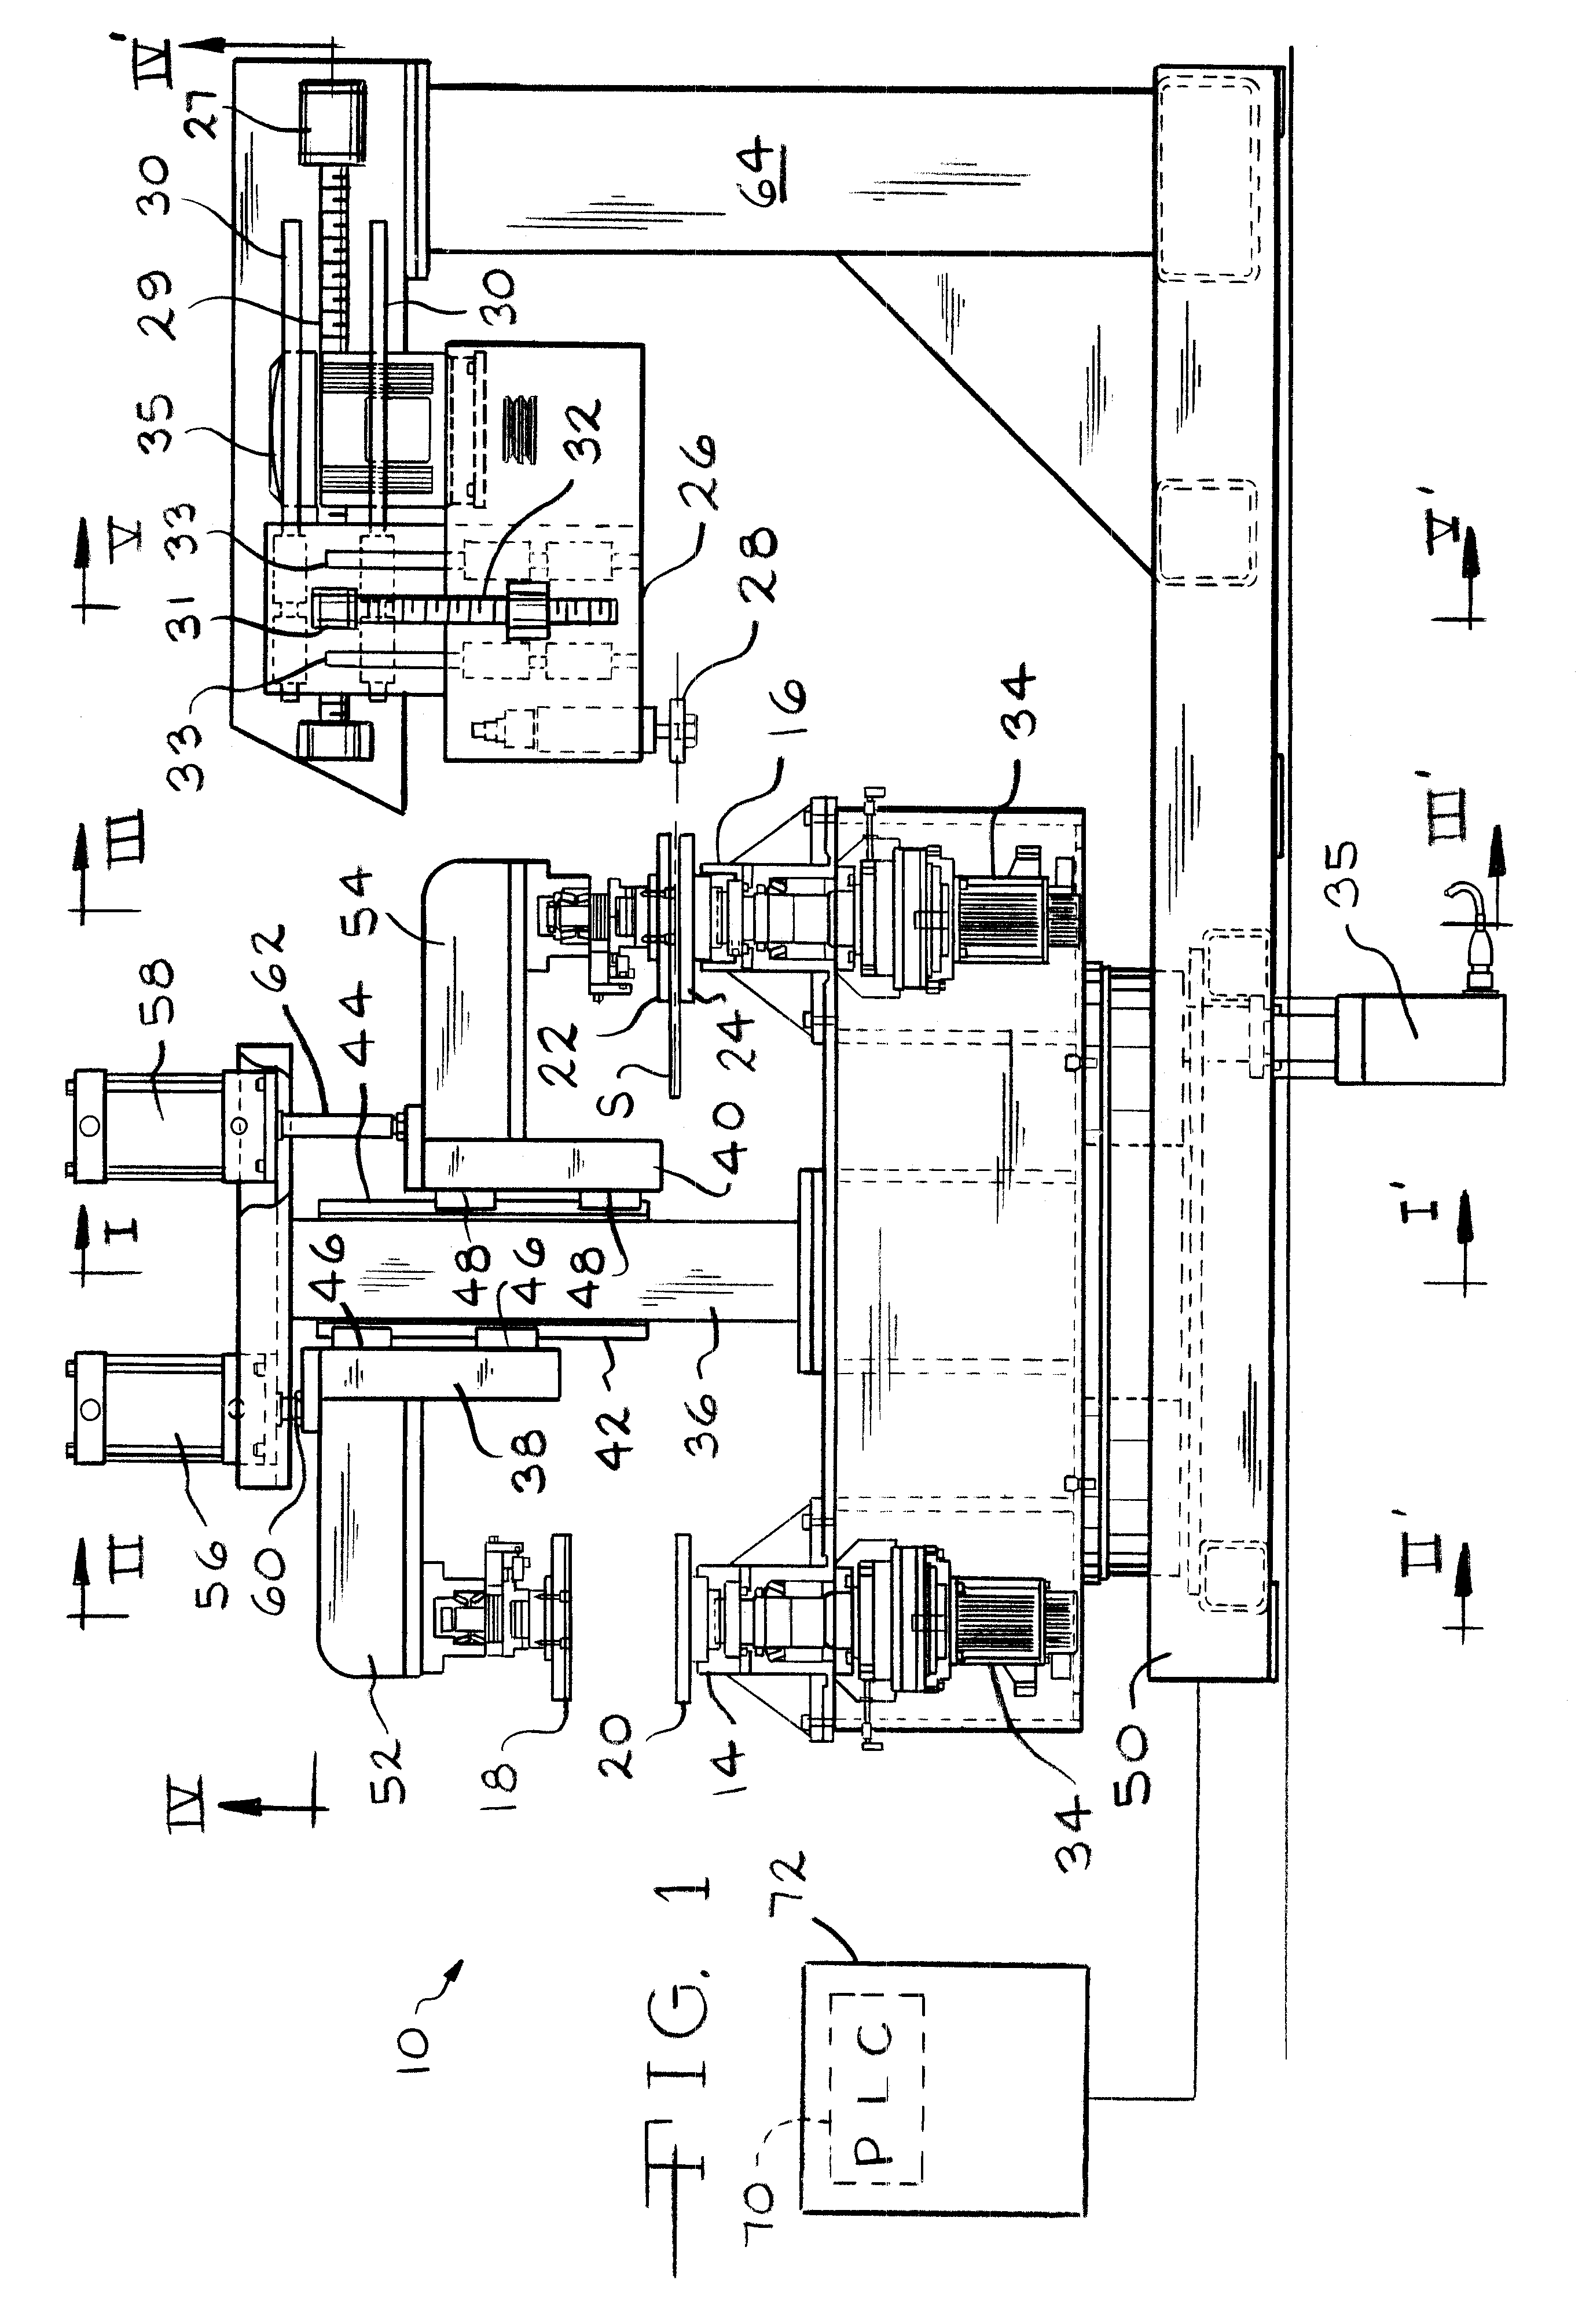 Machine for tooling small parts